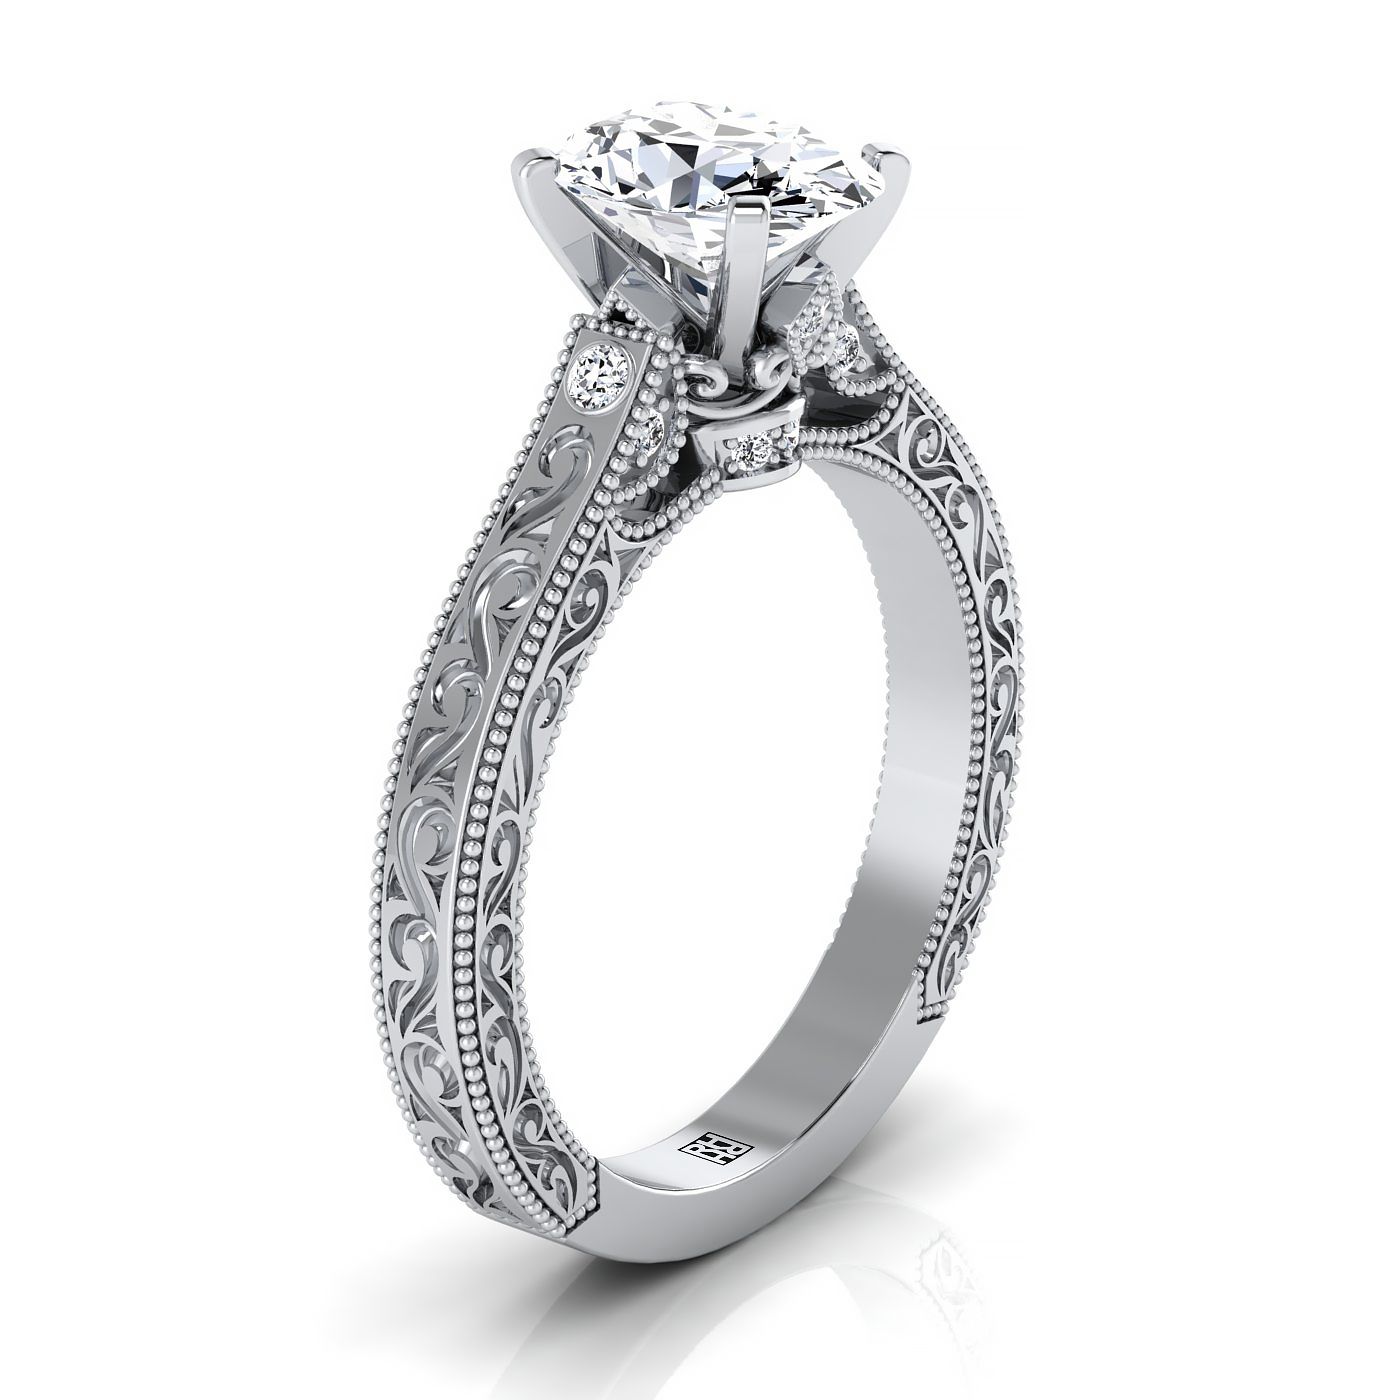 18K White Gold Oval Delicate Diamond Accented Antique Hand Engraved Engagement Ring -1/10ctw